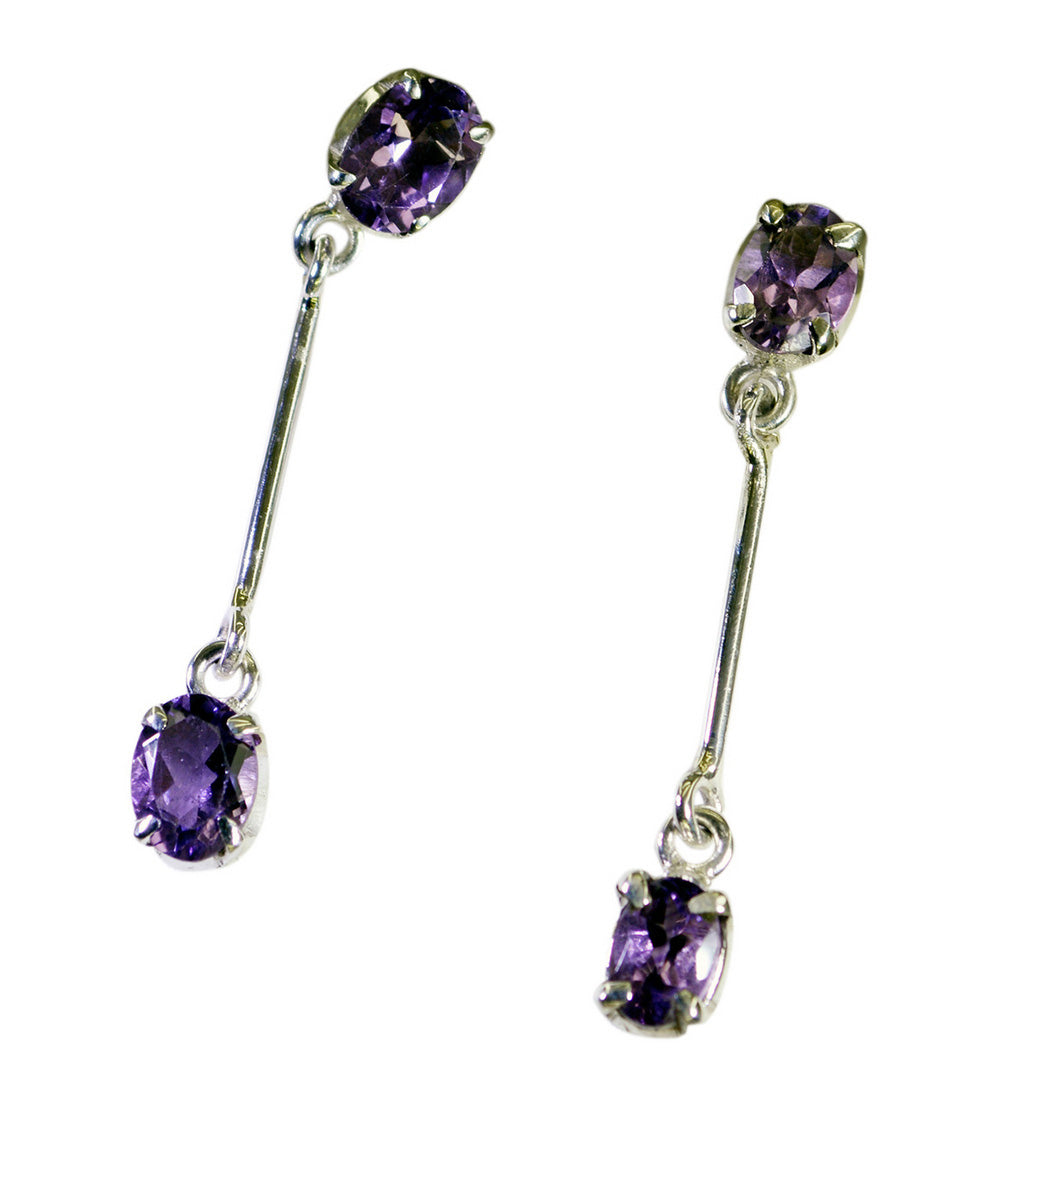 Riyo Nice Gemstone oval Faceted Purple Amethyst Silver Earring gift for easter Sunday